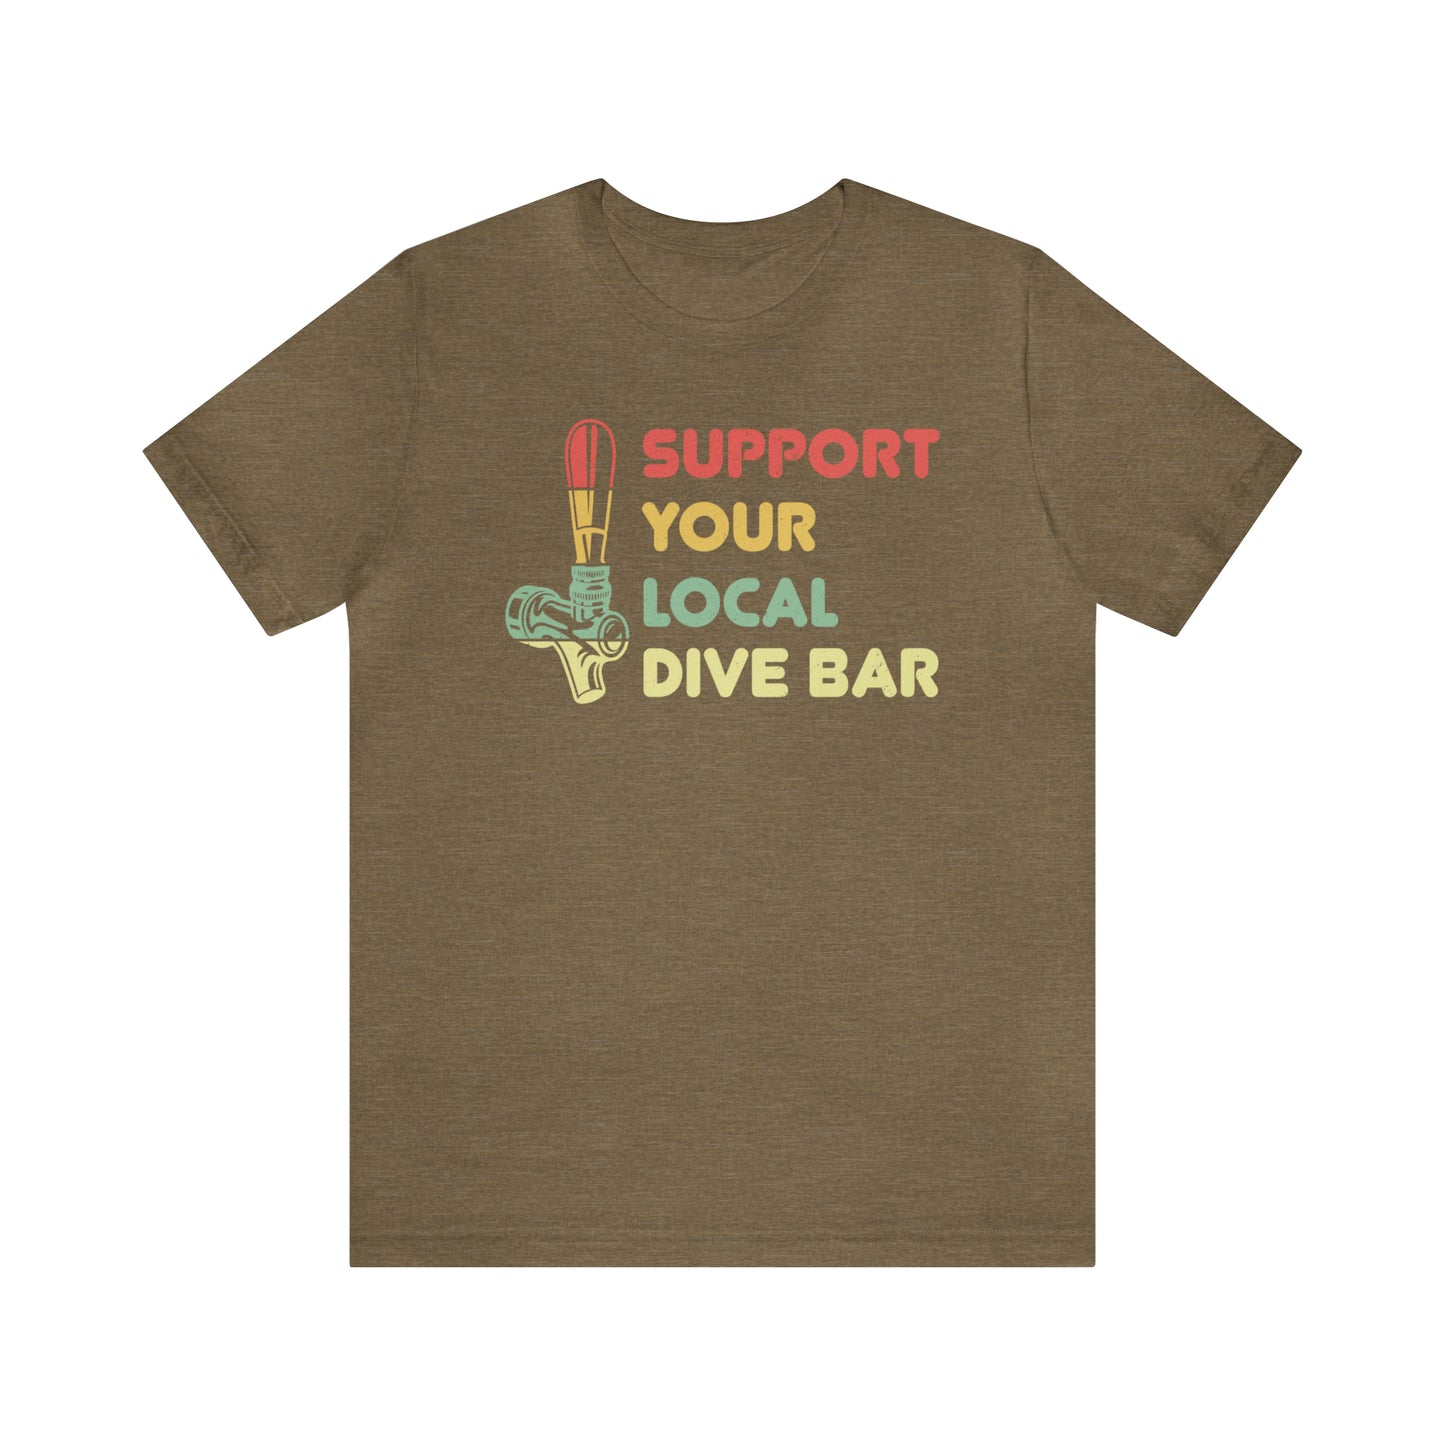 Support Your Local Dive Bar - Unisex Jersey Short Sleeve Tee